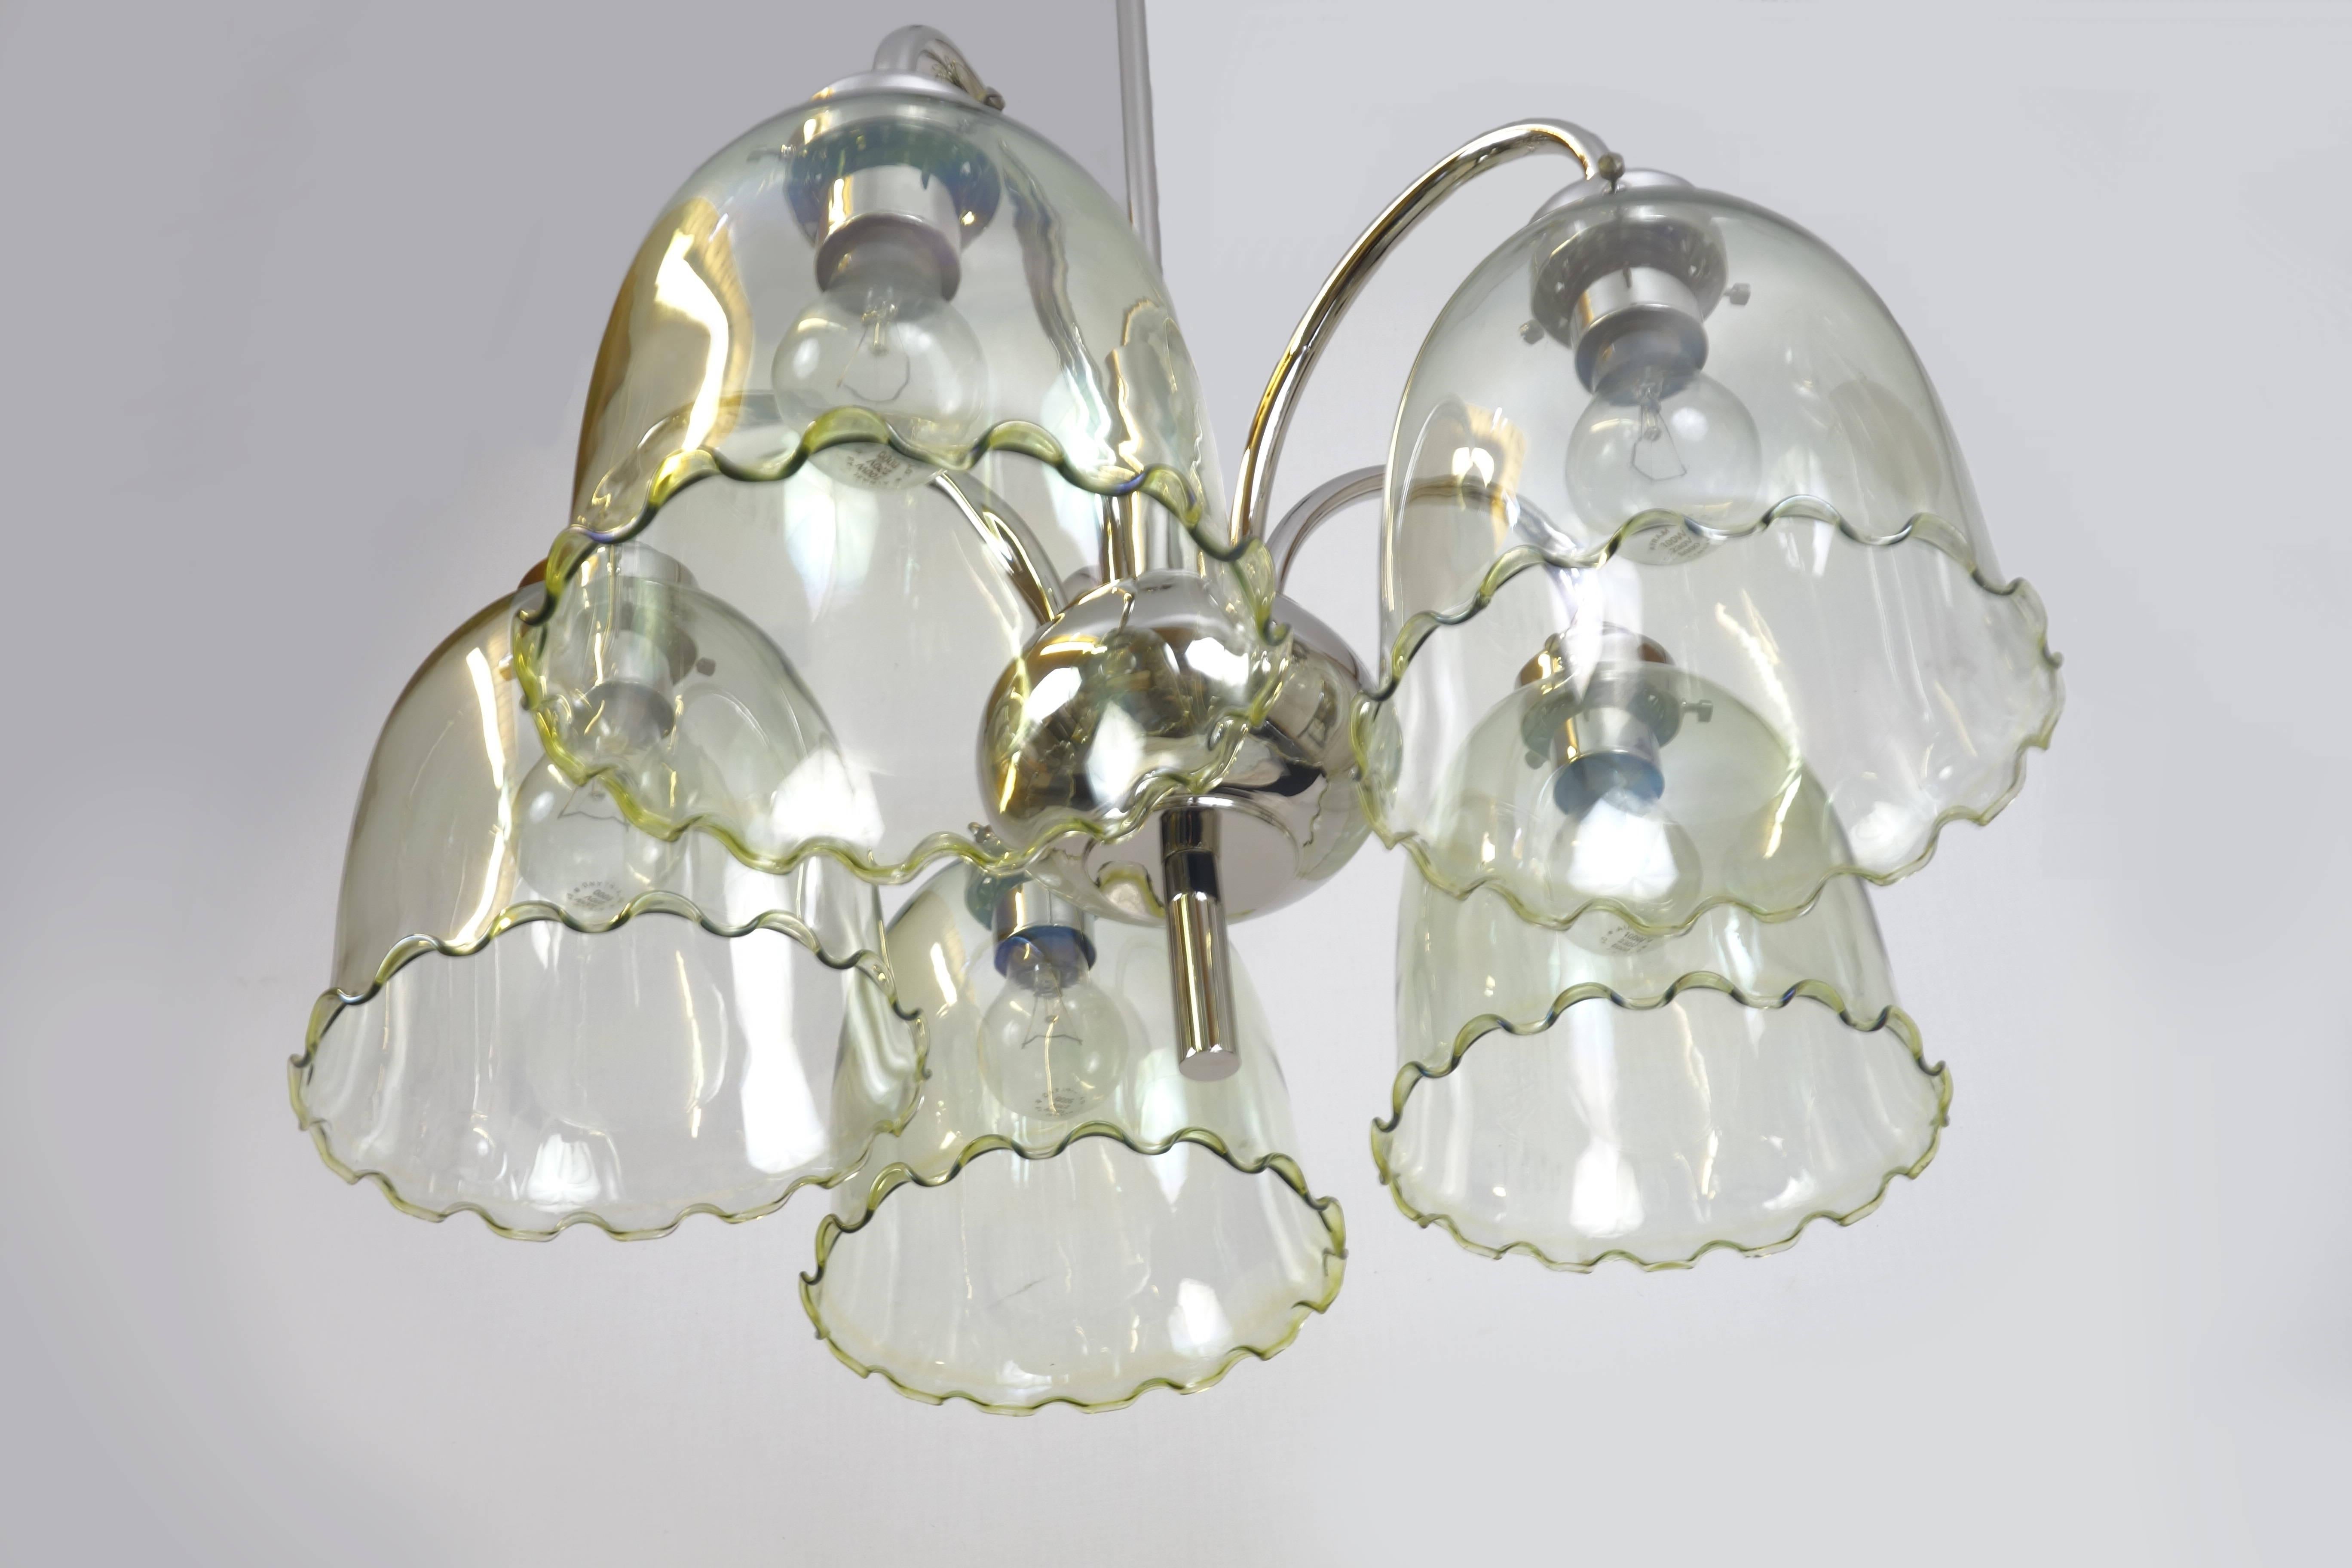 Impressive and unique Italian chandelier of the 1930s in stunning condition. This object has been disassembled completely. The nickel-plated aluminum parts were high gloss polished and finally the object has been newly electrified according to